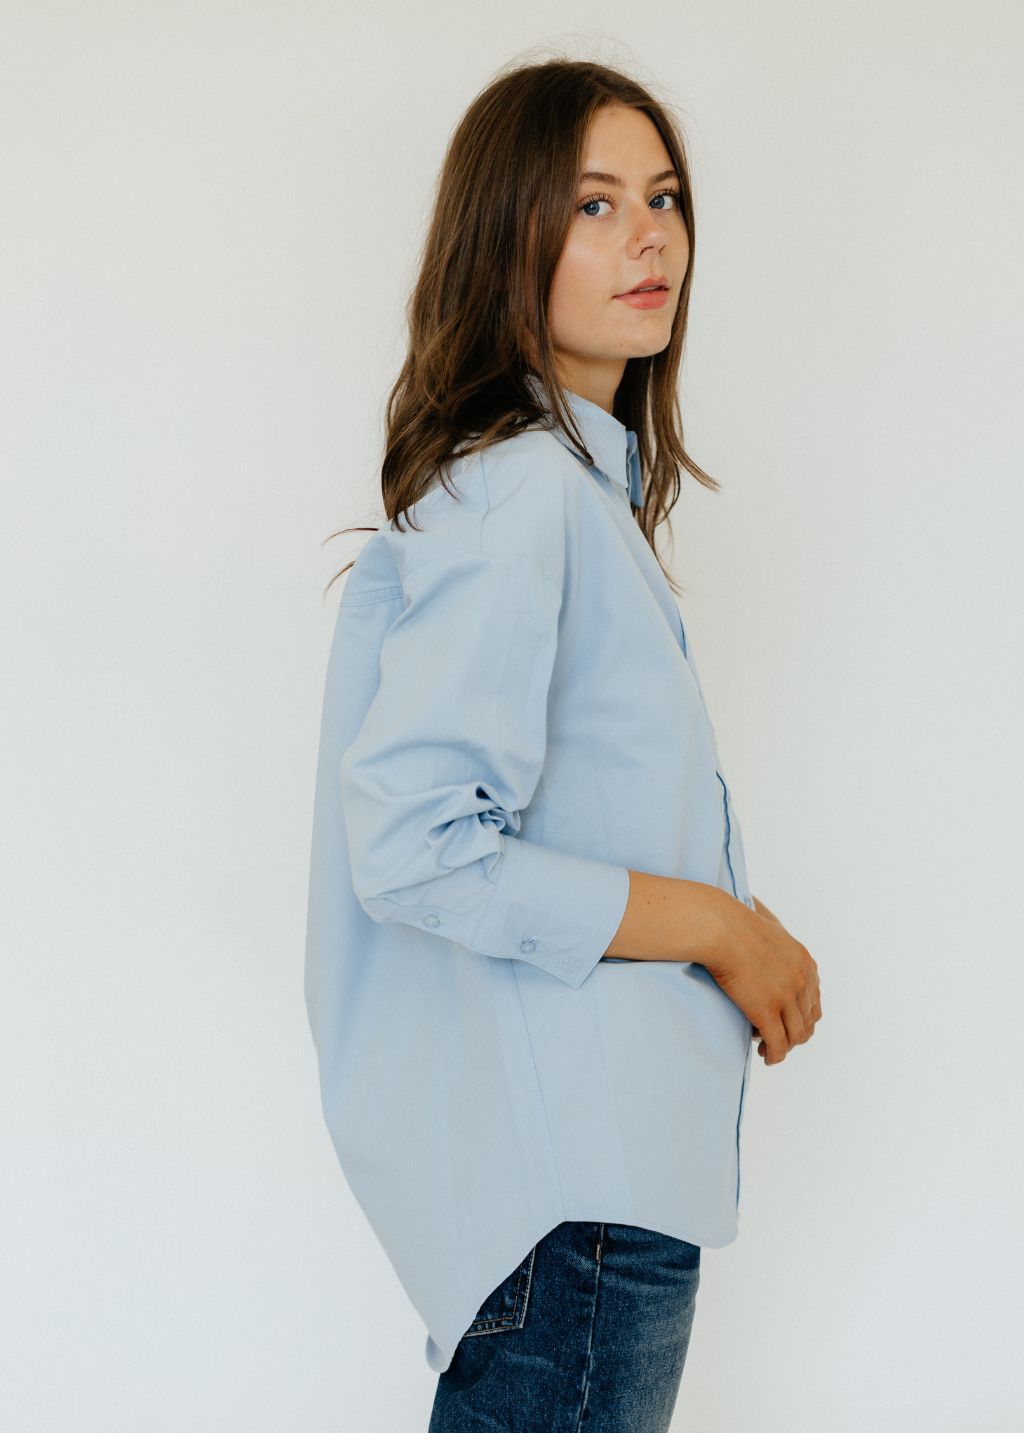 Style muse @lauraverwi in the bestselling Anine Bing MIKA SHIRT